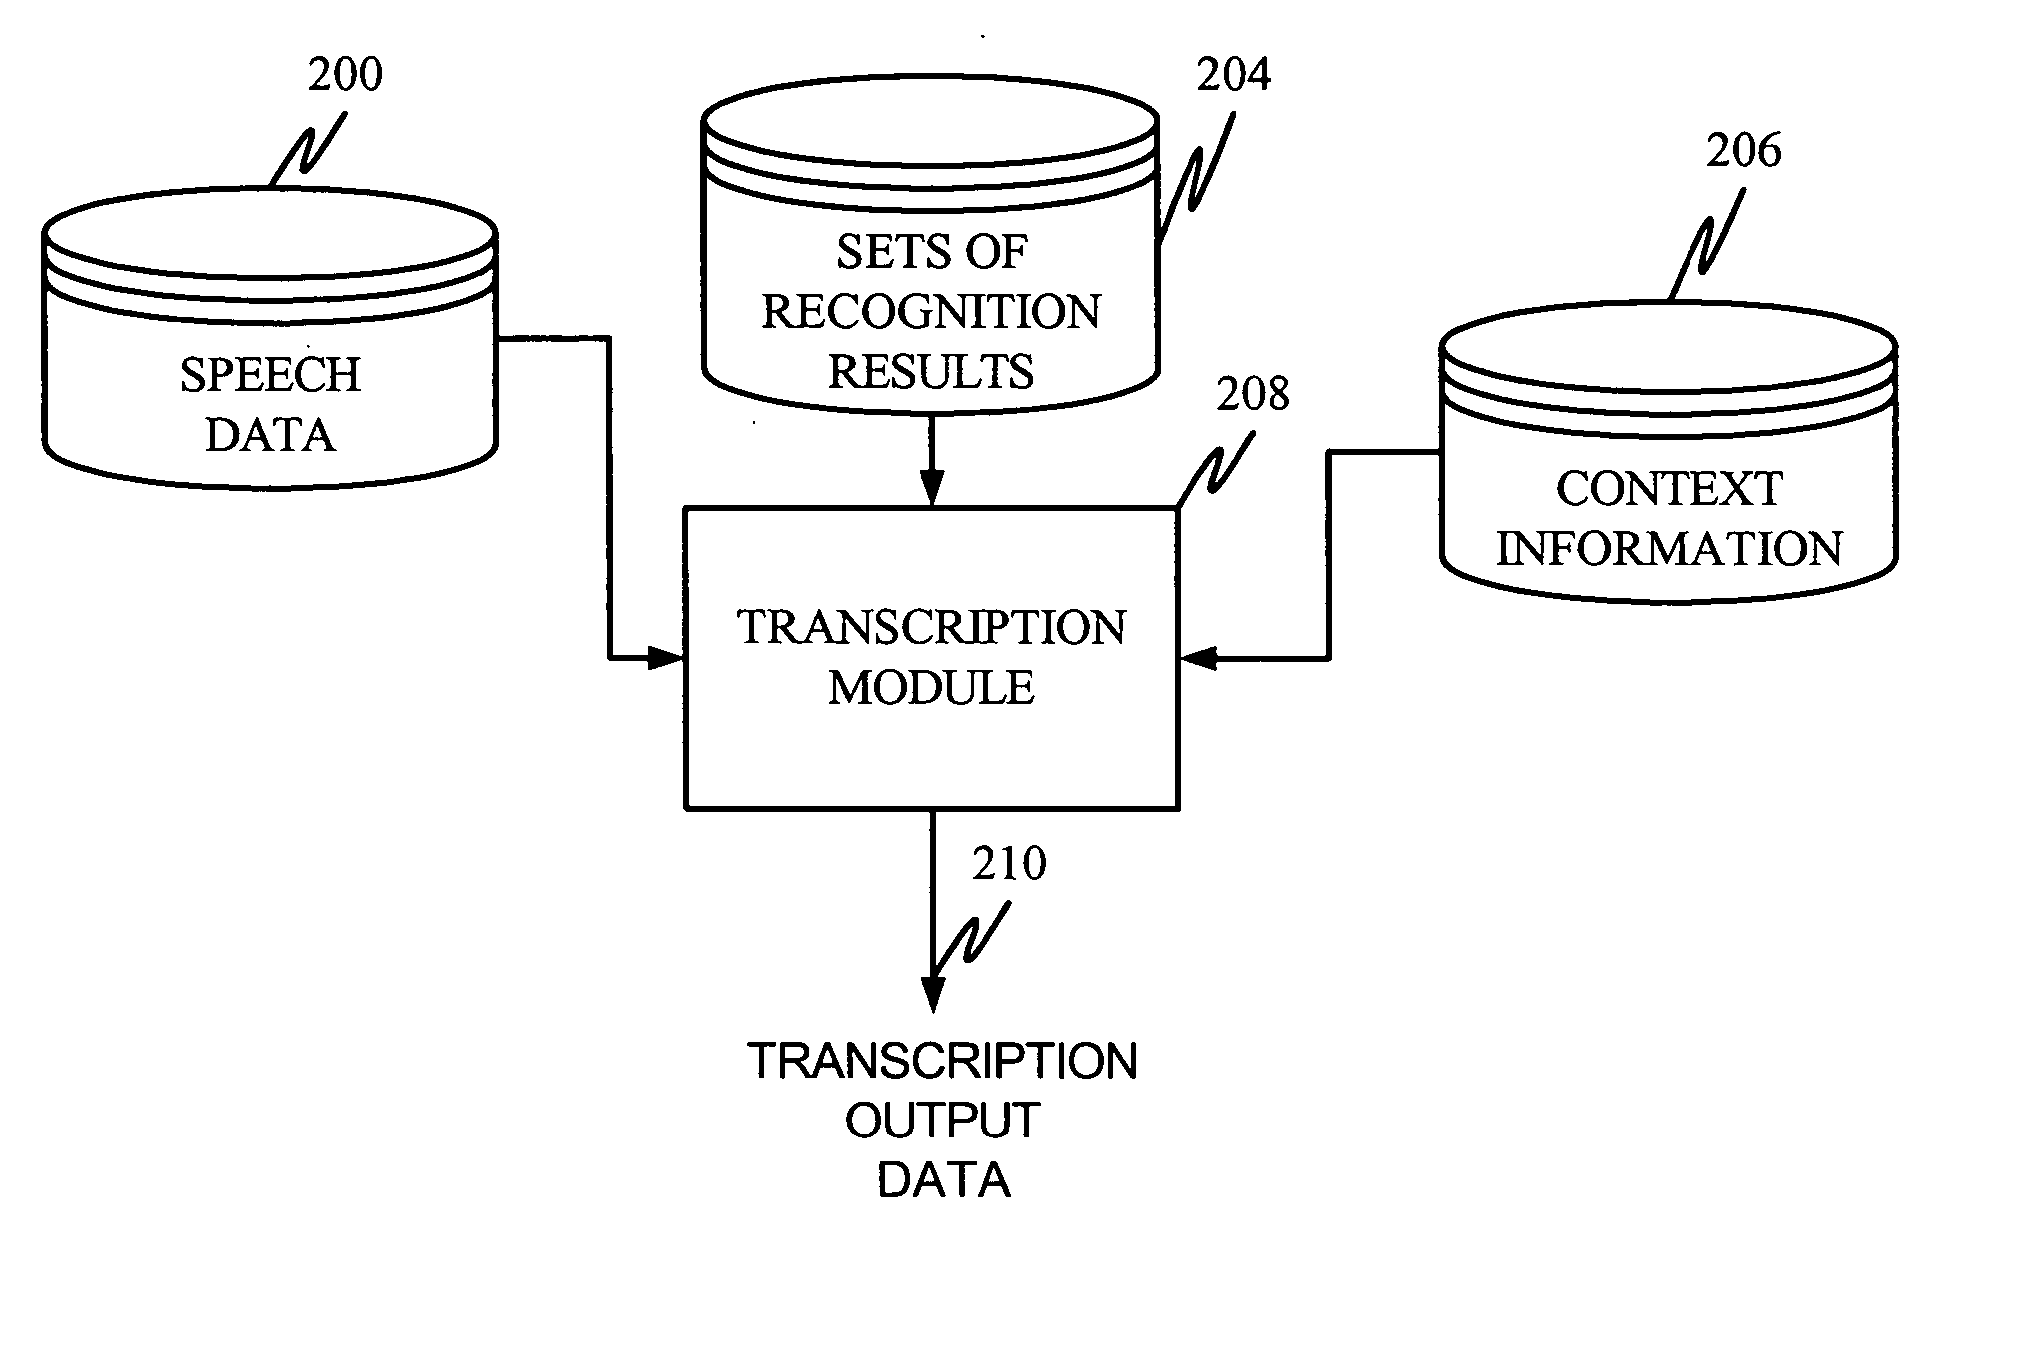 Transcribing speech data with dialog context and/or recognition alternative information